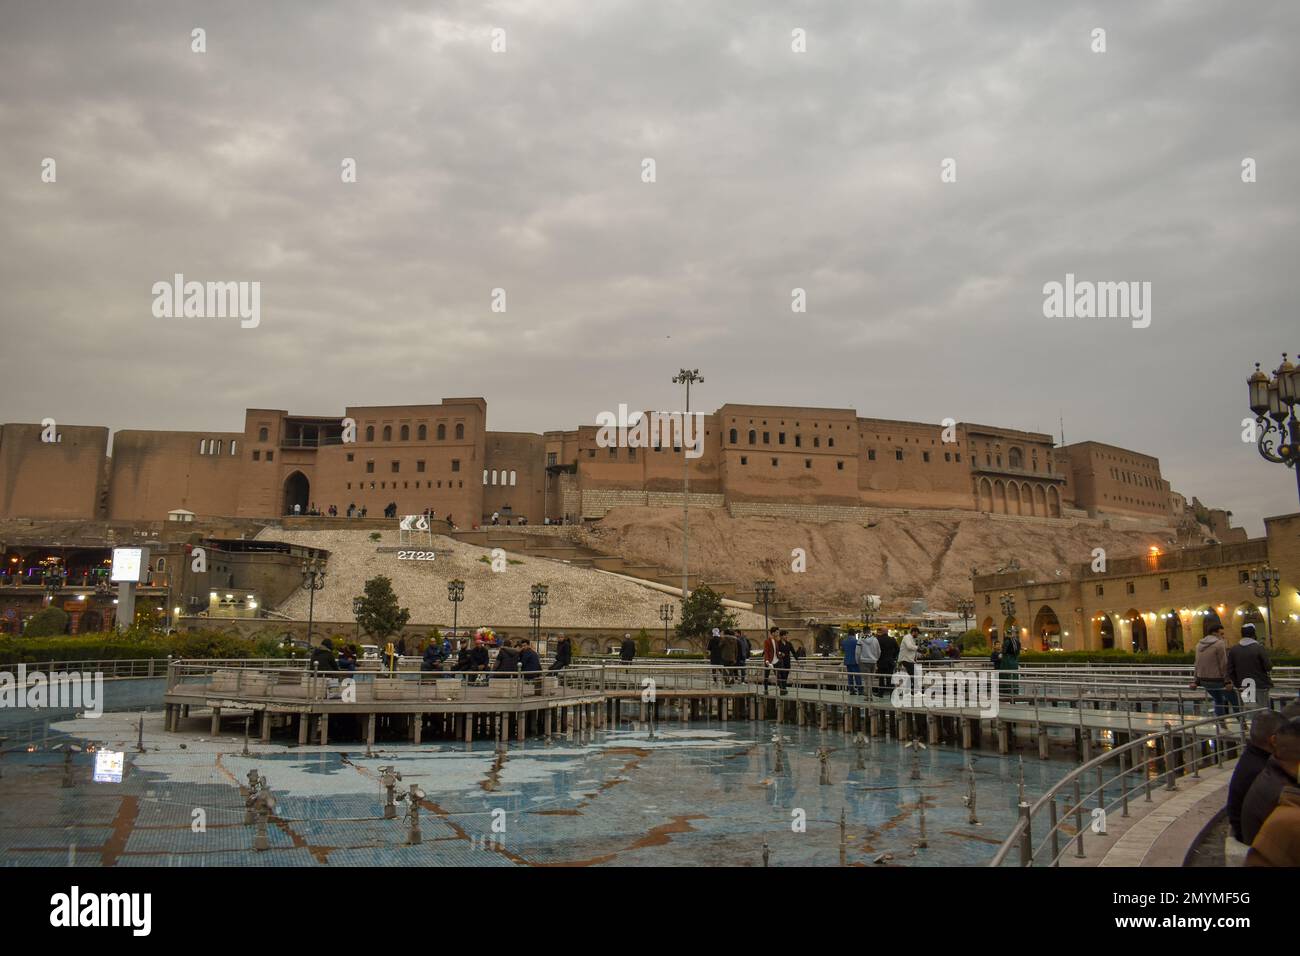 The historical Erbil Citadel at the city centre is said to be the oldenst continuously occupied city in the world. Stock Photo